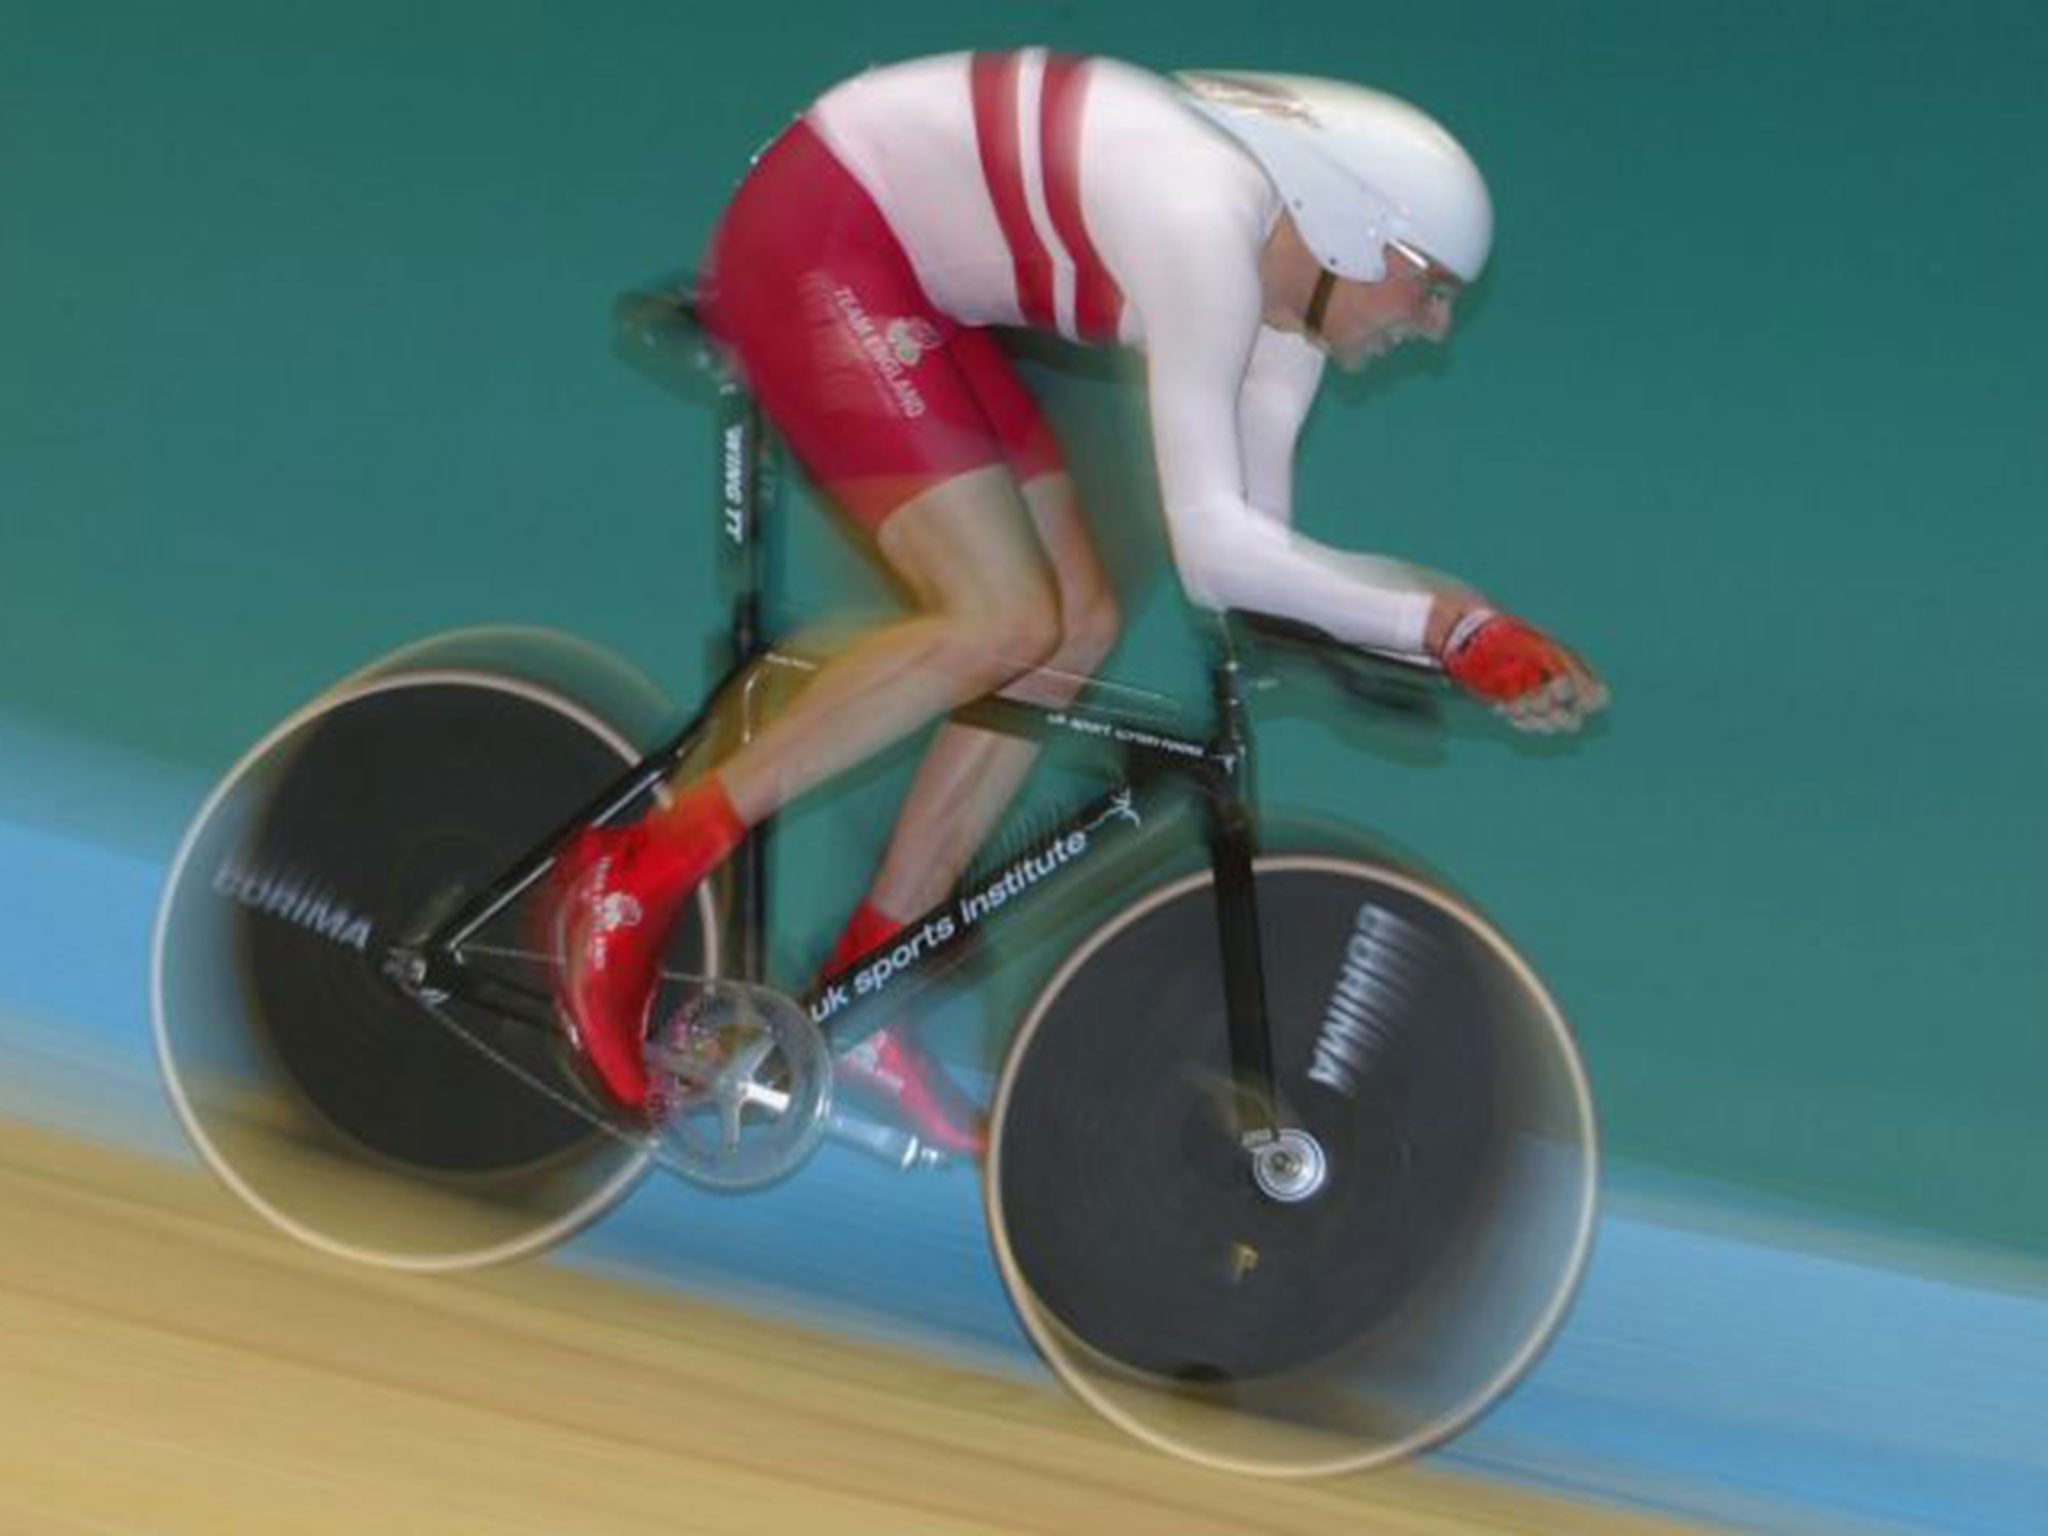 Bradley Wiggins wins silver at the 2002 Games in Manchester